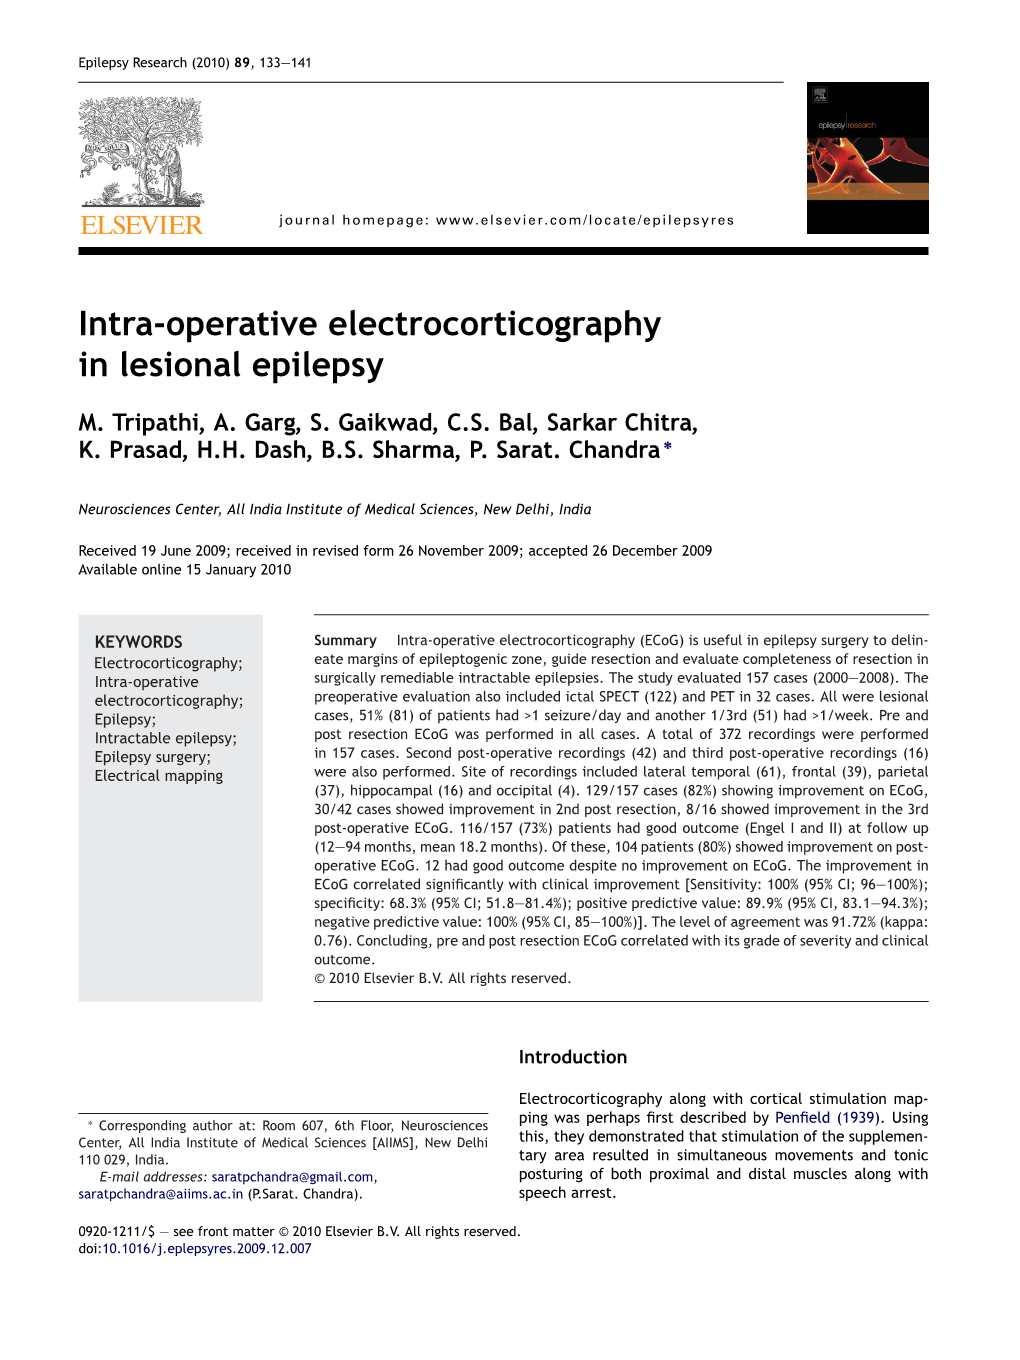 Intra-Operative Electrocorticography in Lesional Epilepsy